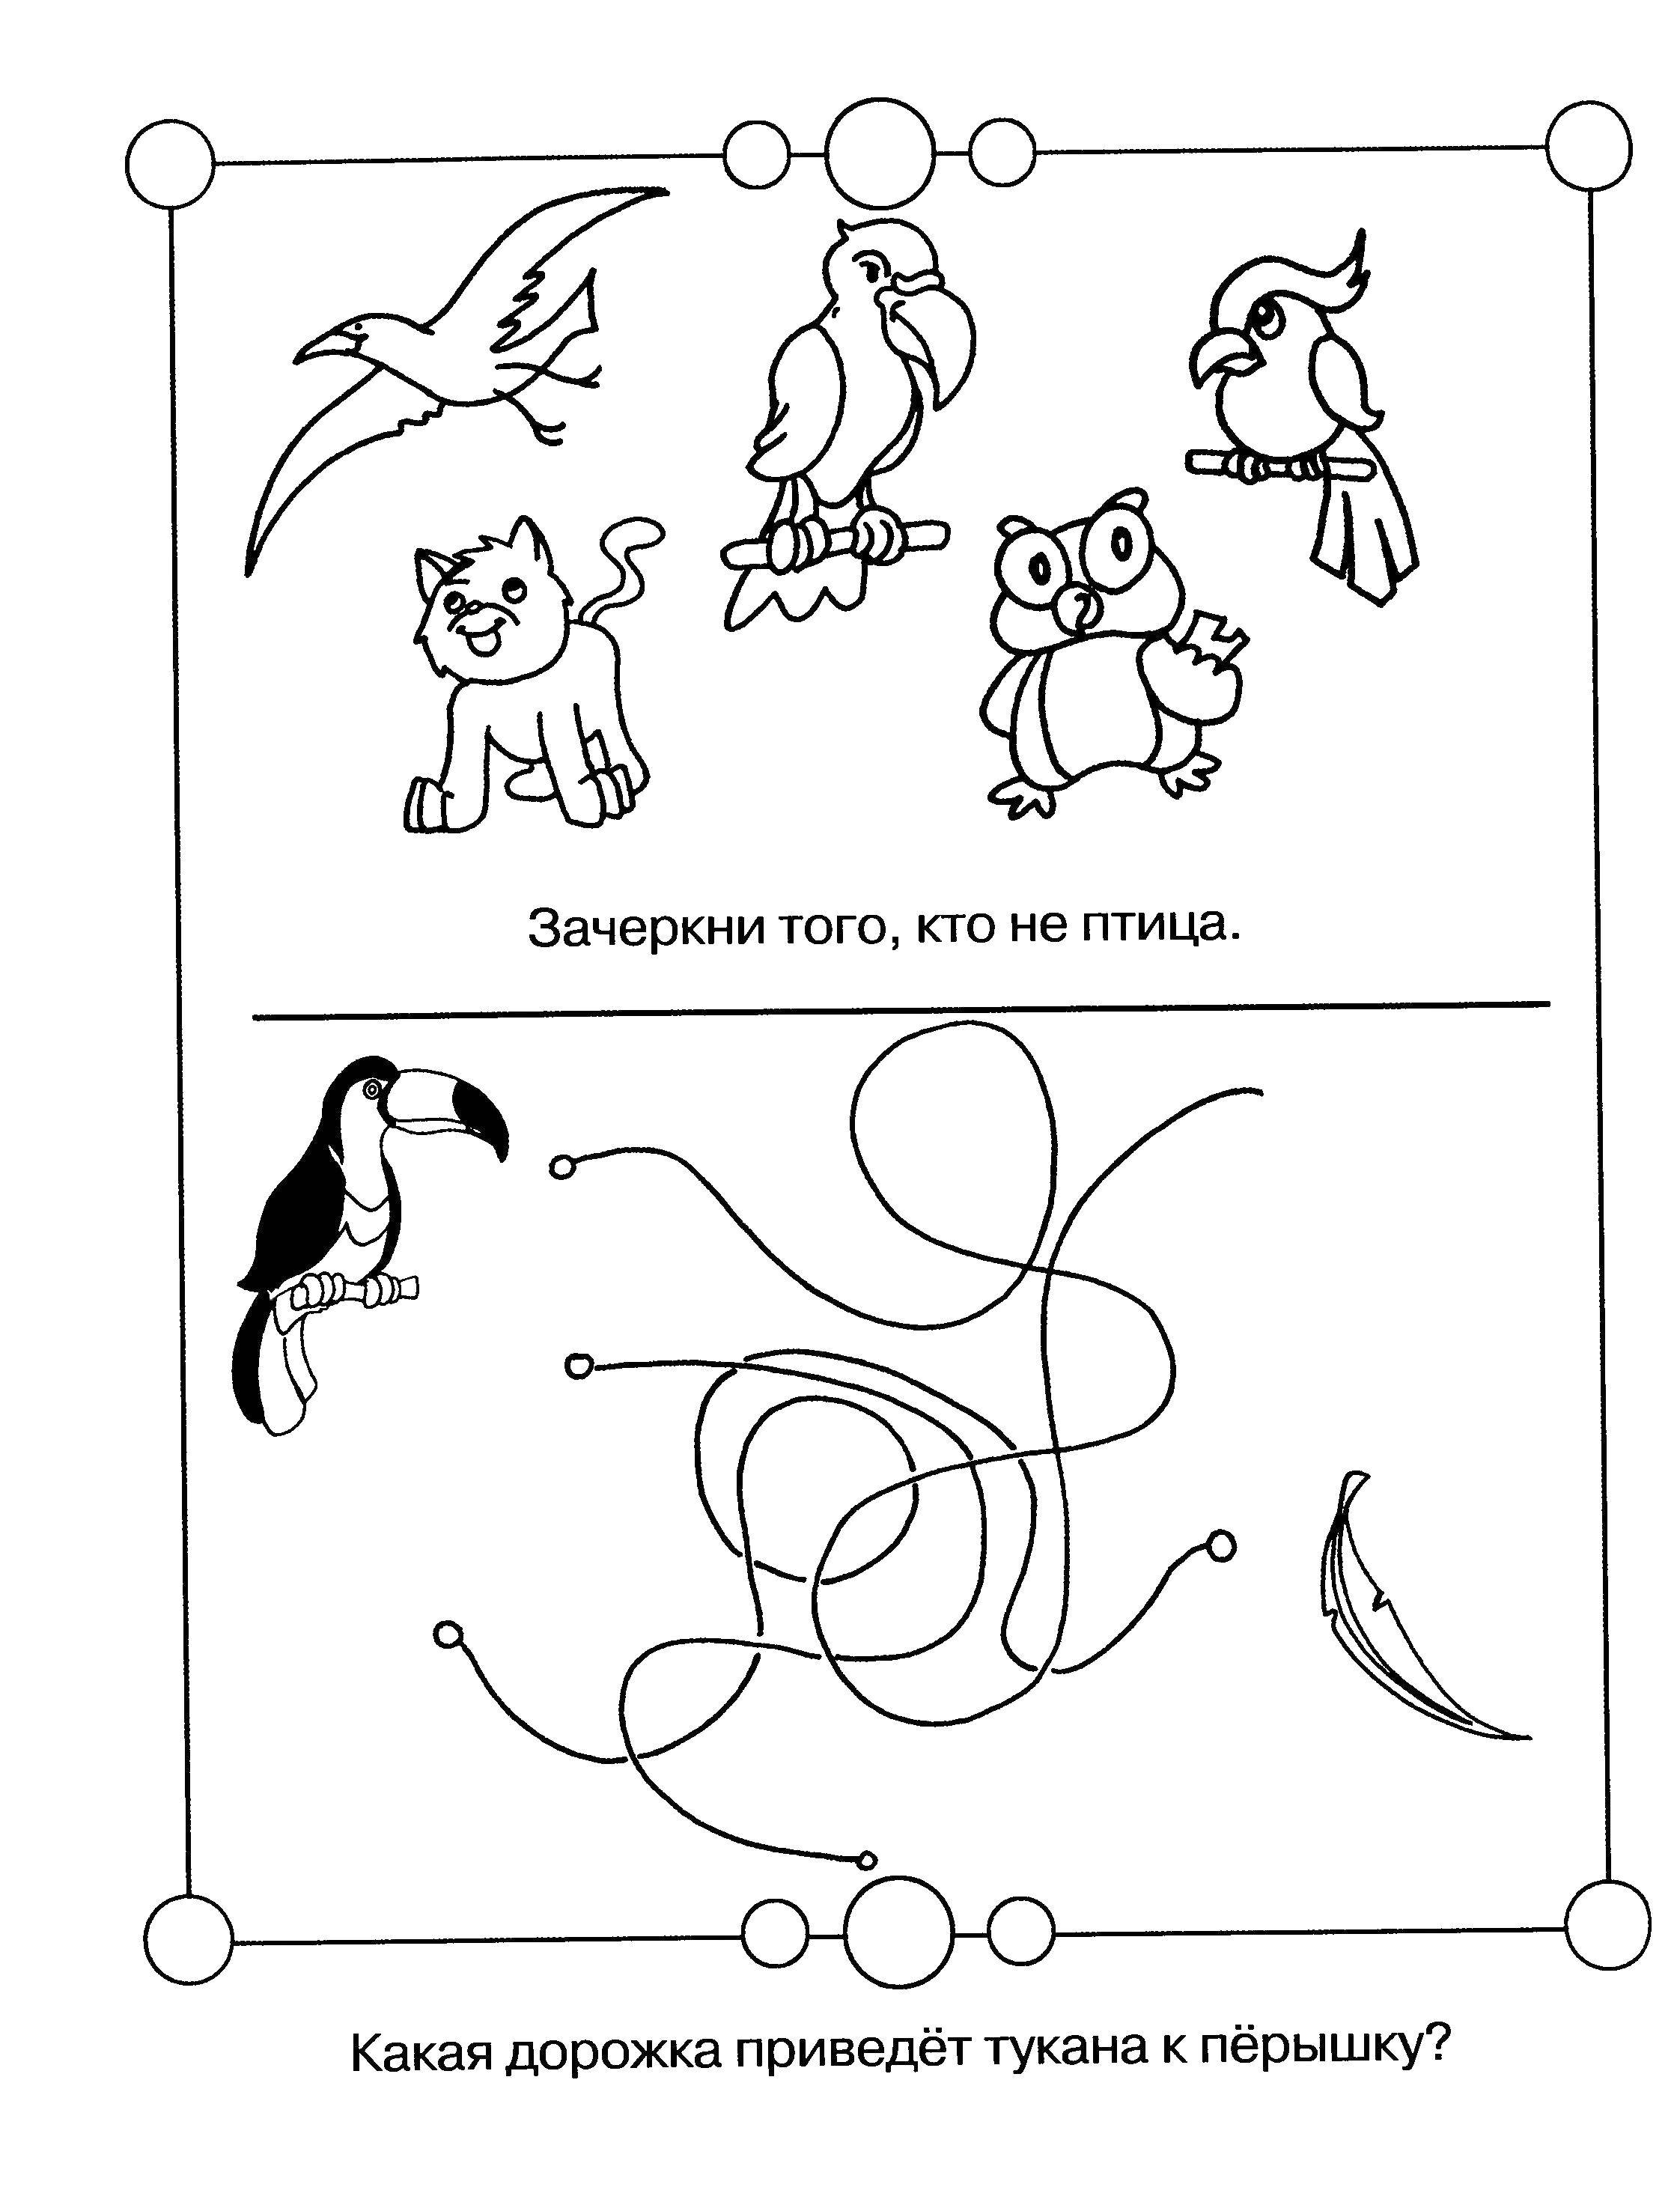 Coloring Cross out the unnecessary. Category riddles for kids. Tags:  Teaching coloring, logic.